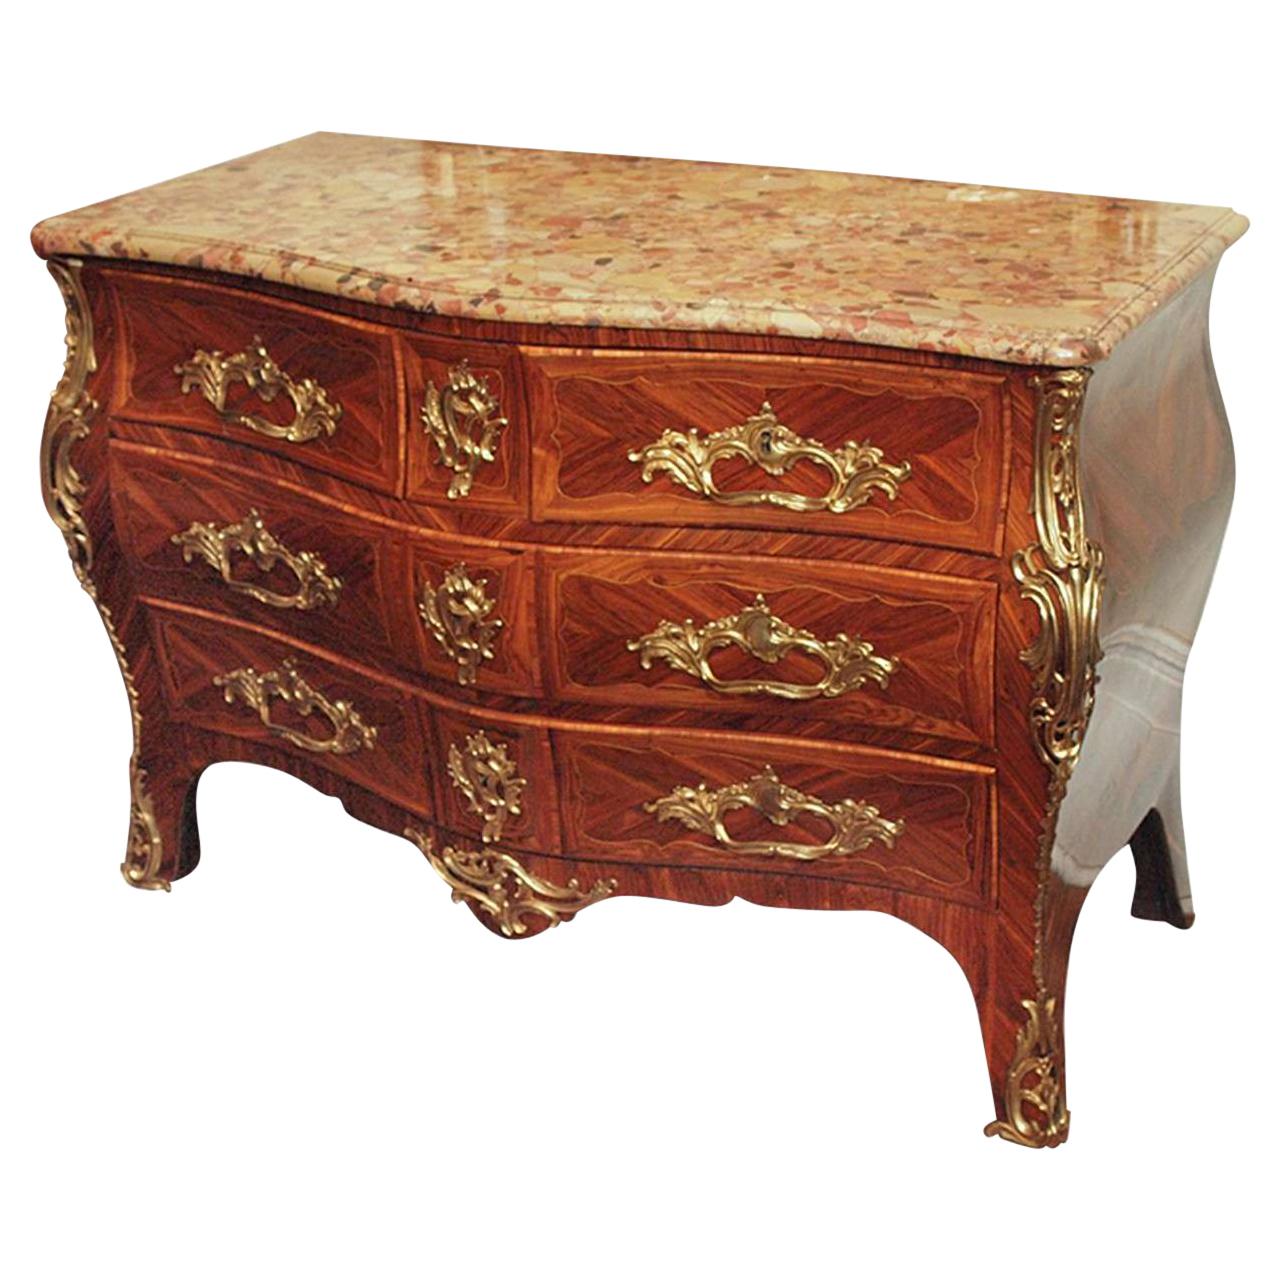 Antique French Commode circa 1790-1820 with Finest Exotic Woods For Sale